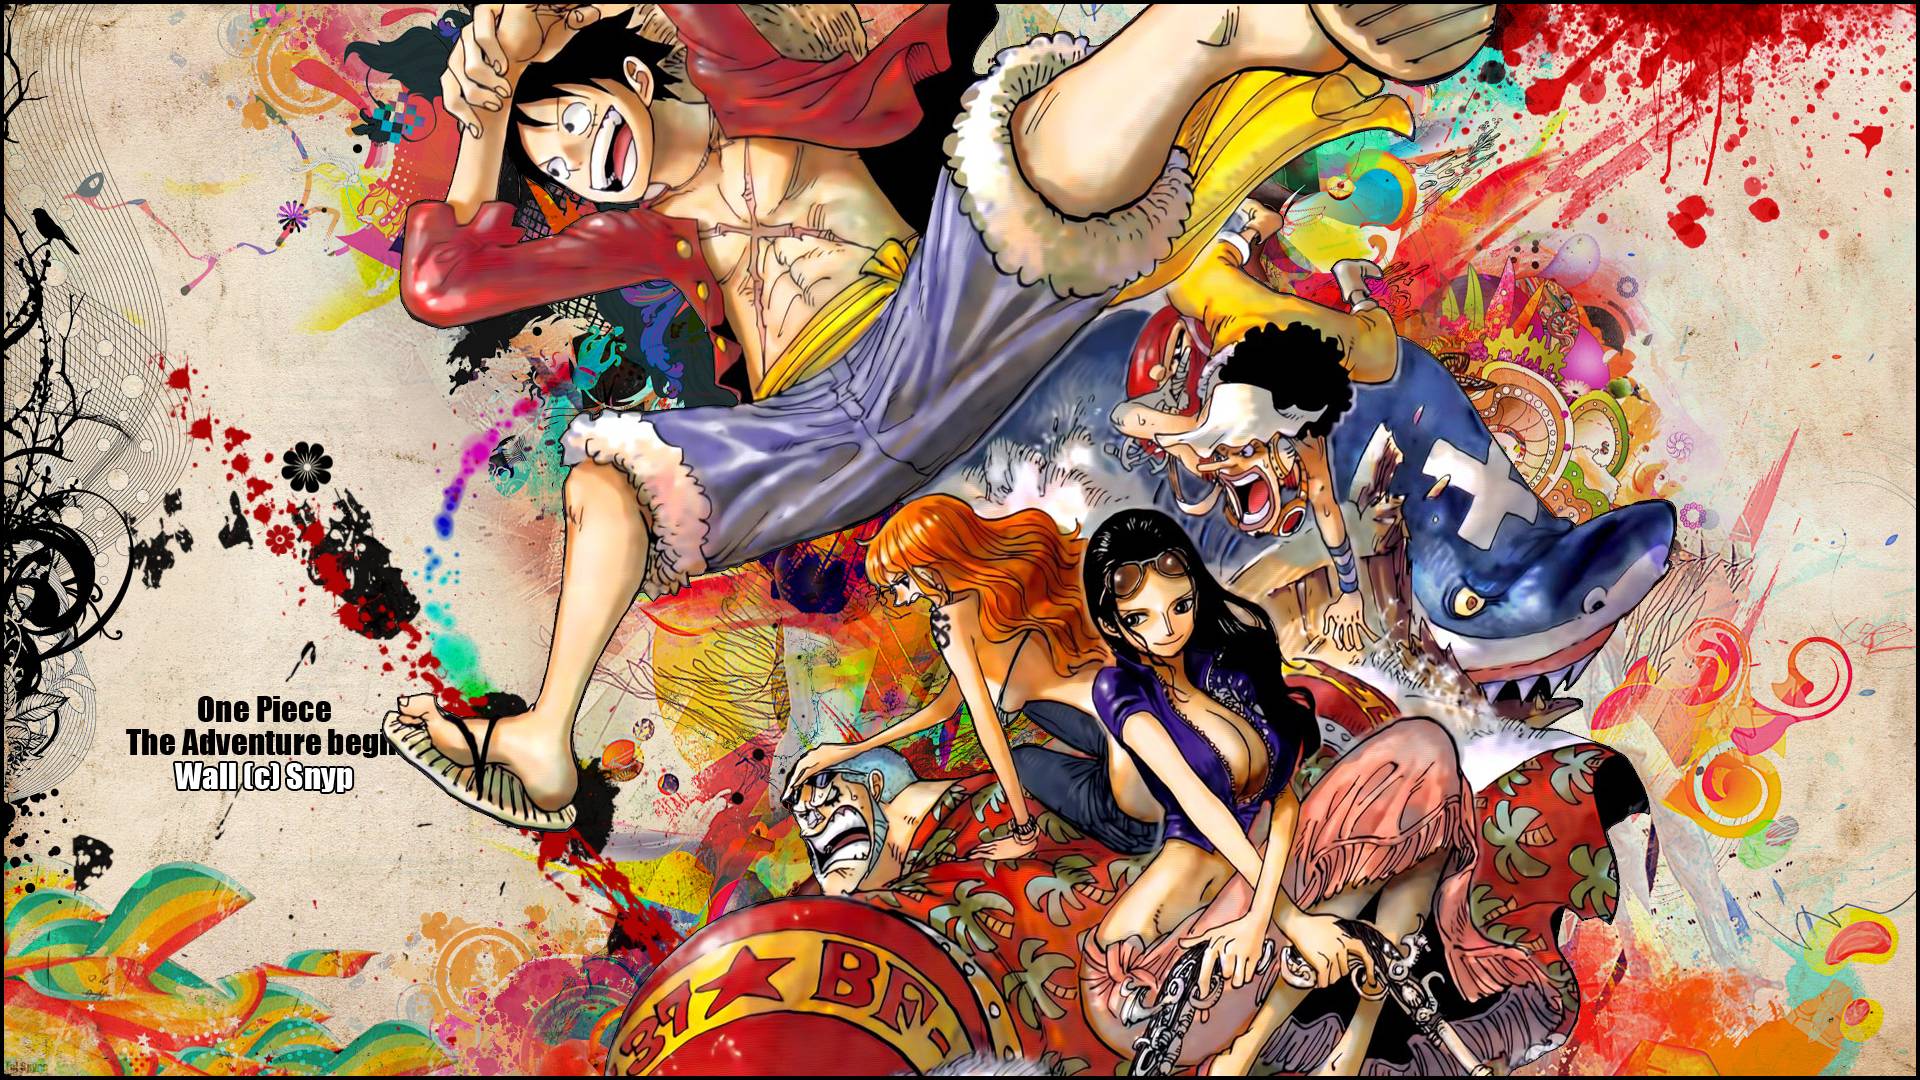 Background One Piece X Cave On Wallpaper HD Image Of Androids